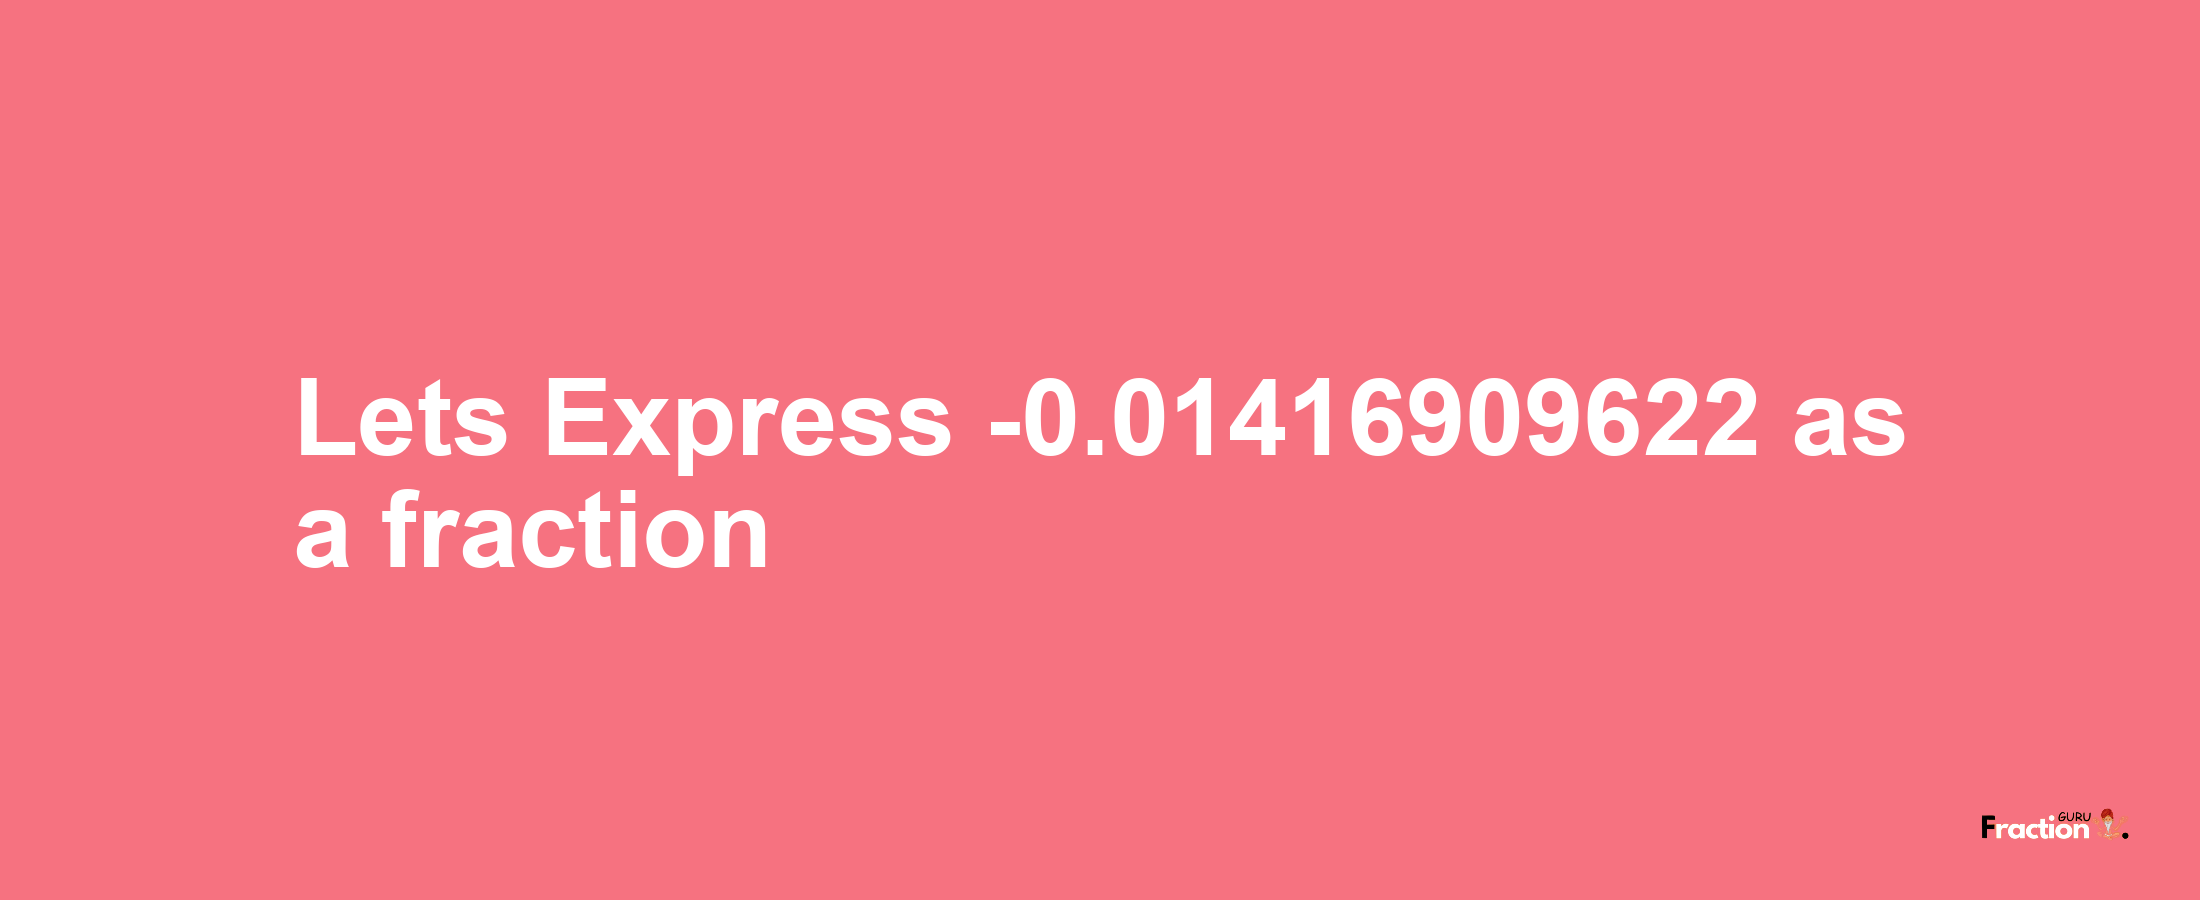 Lets Express -0.01416909622 as afraction